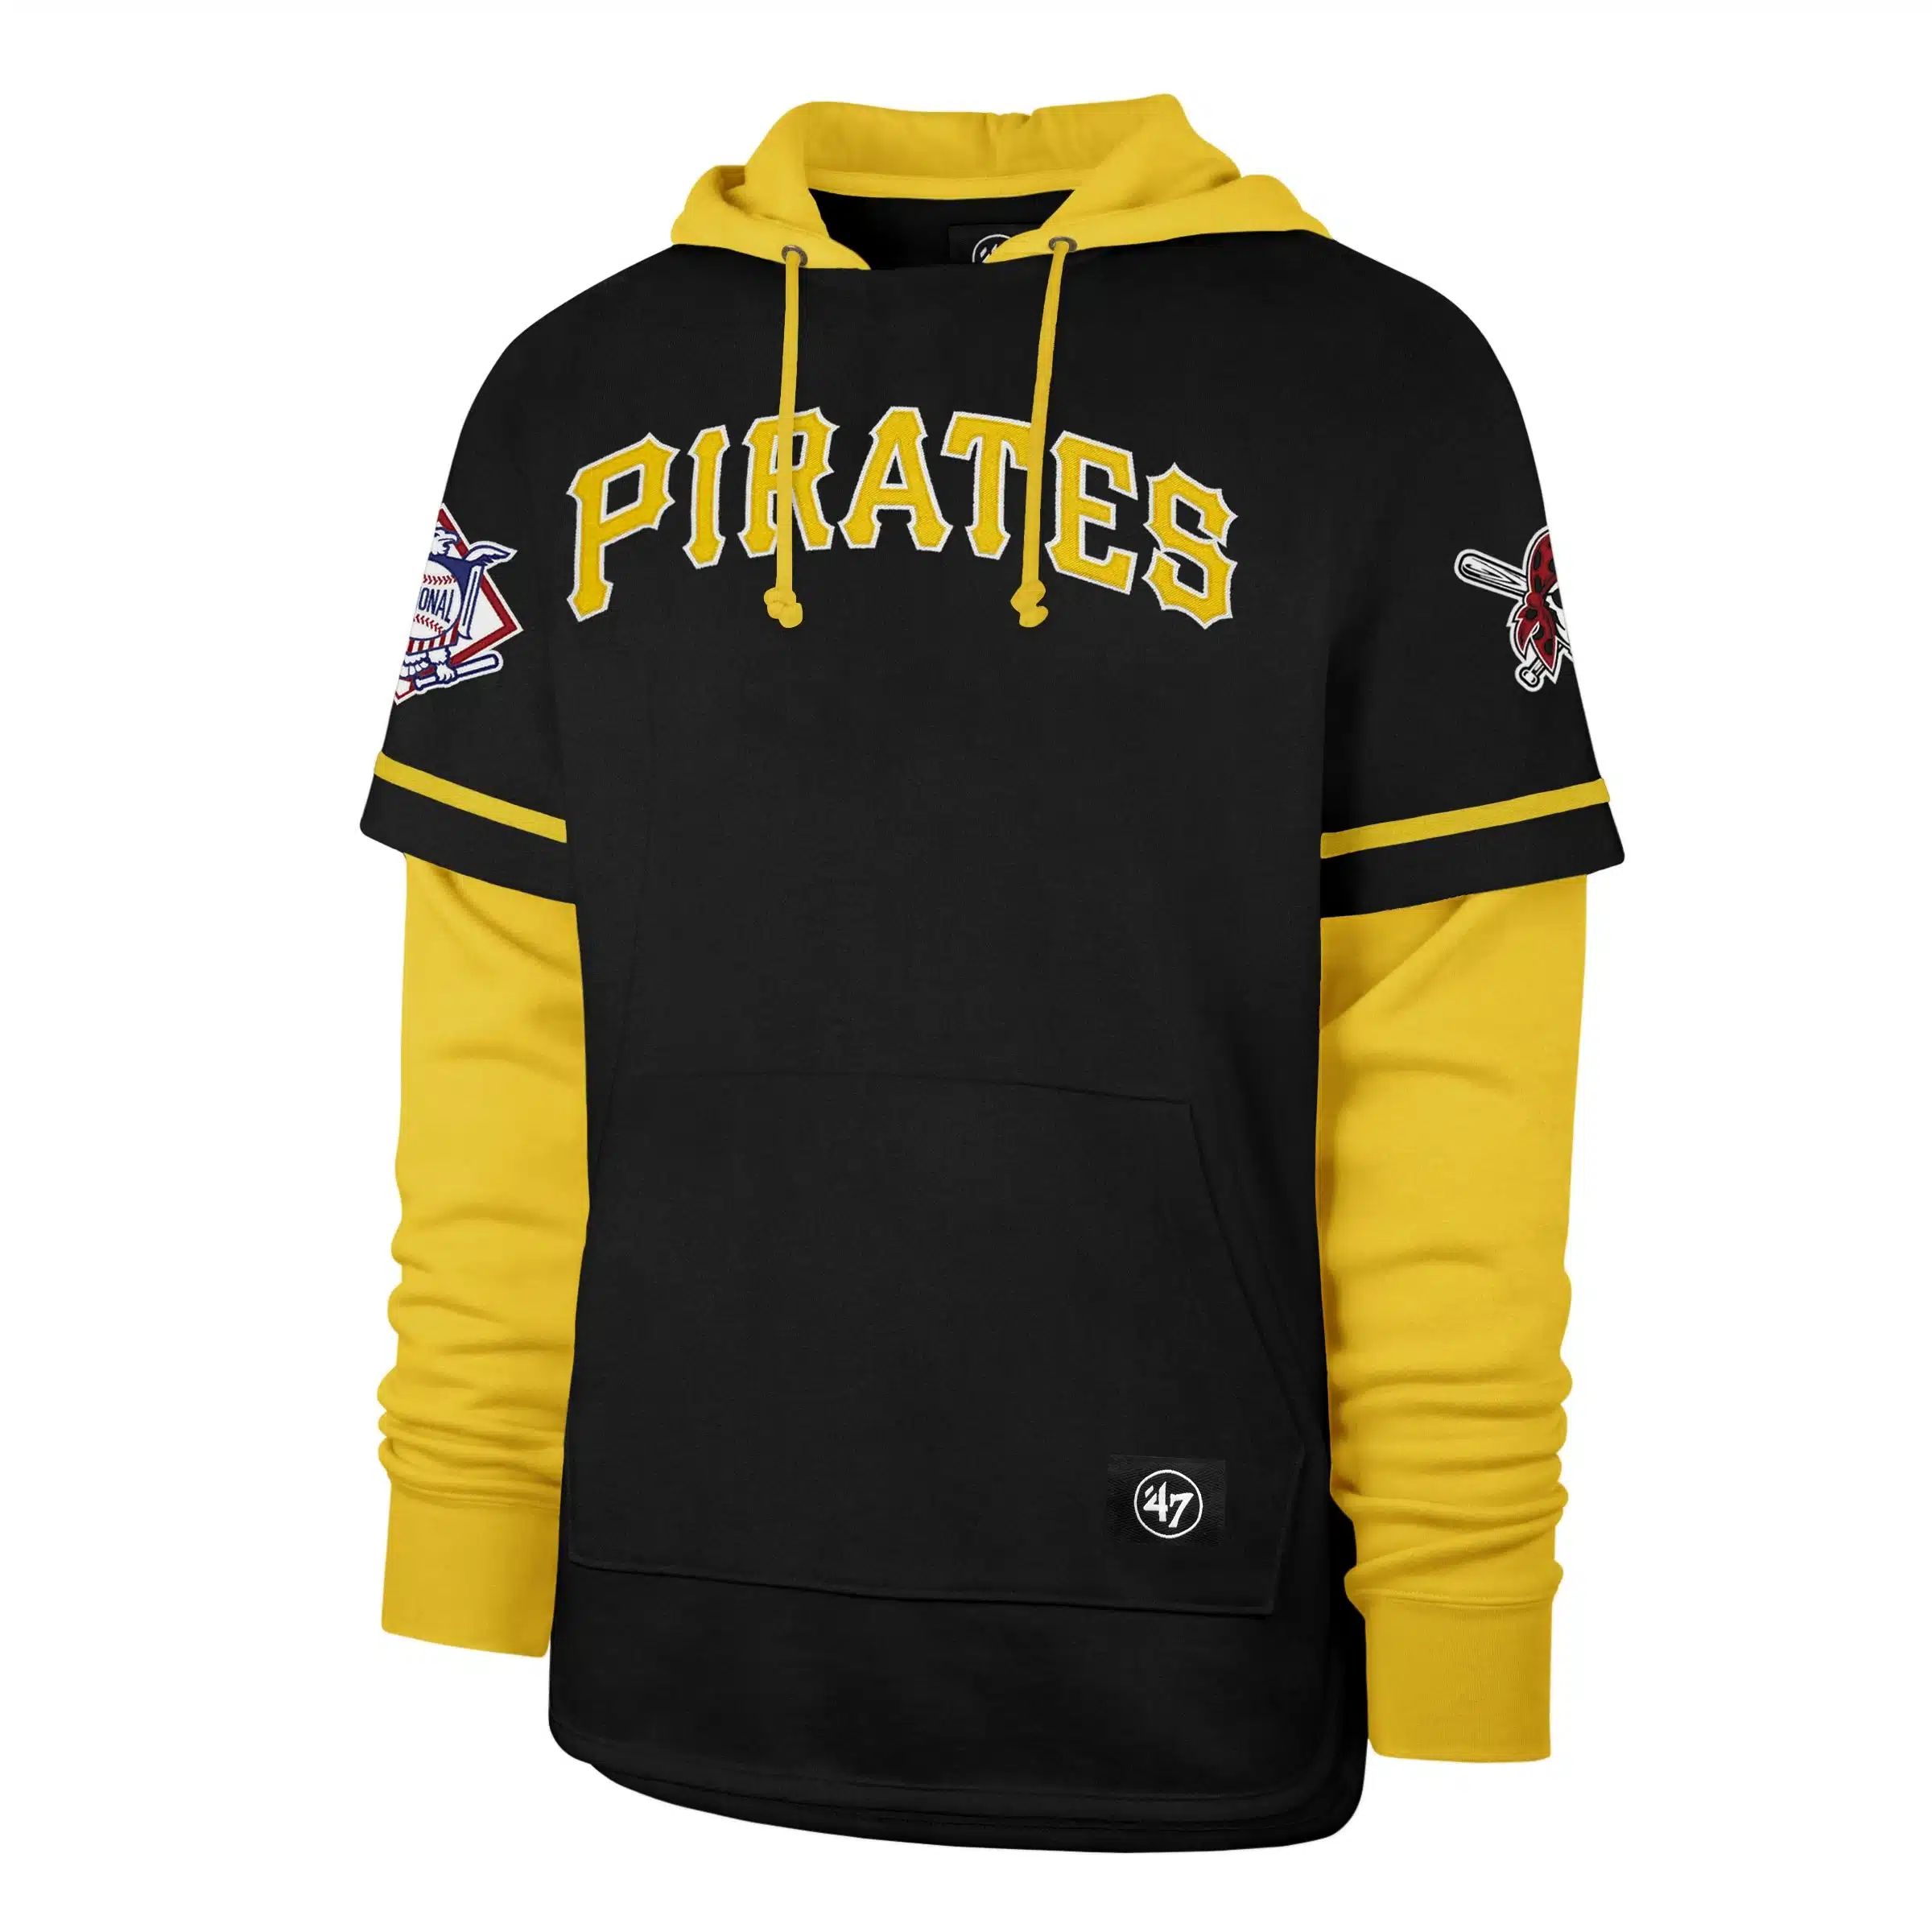 Pittsburgh Pirates Men's 47 Brand Black Shortstop Pullover Hoodie - Small